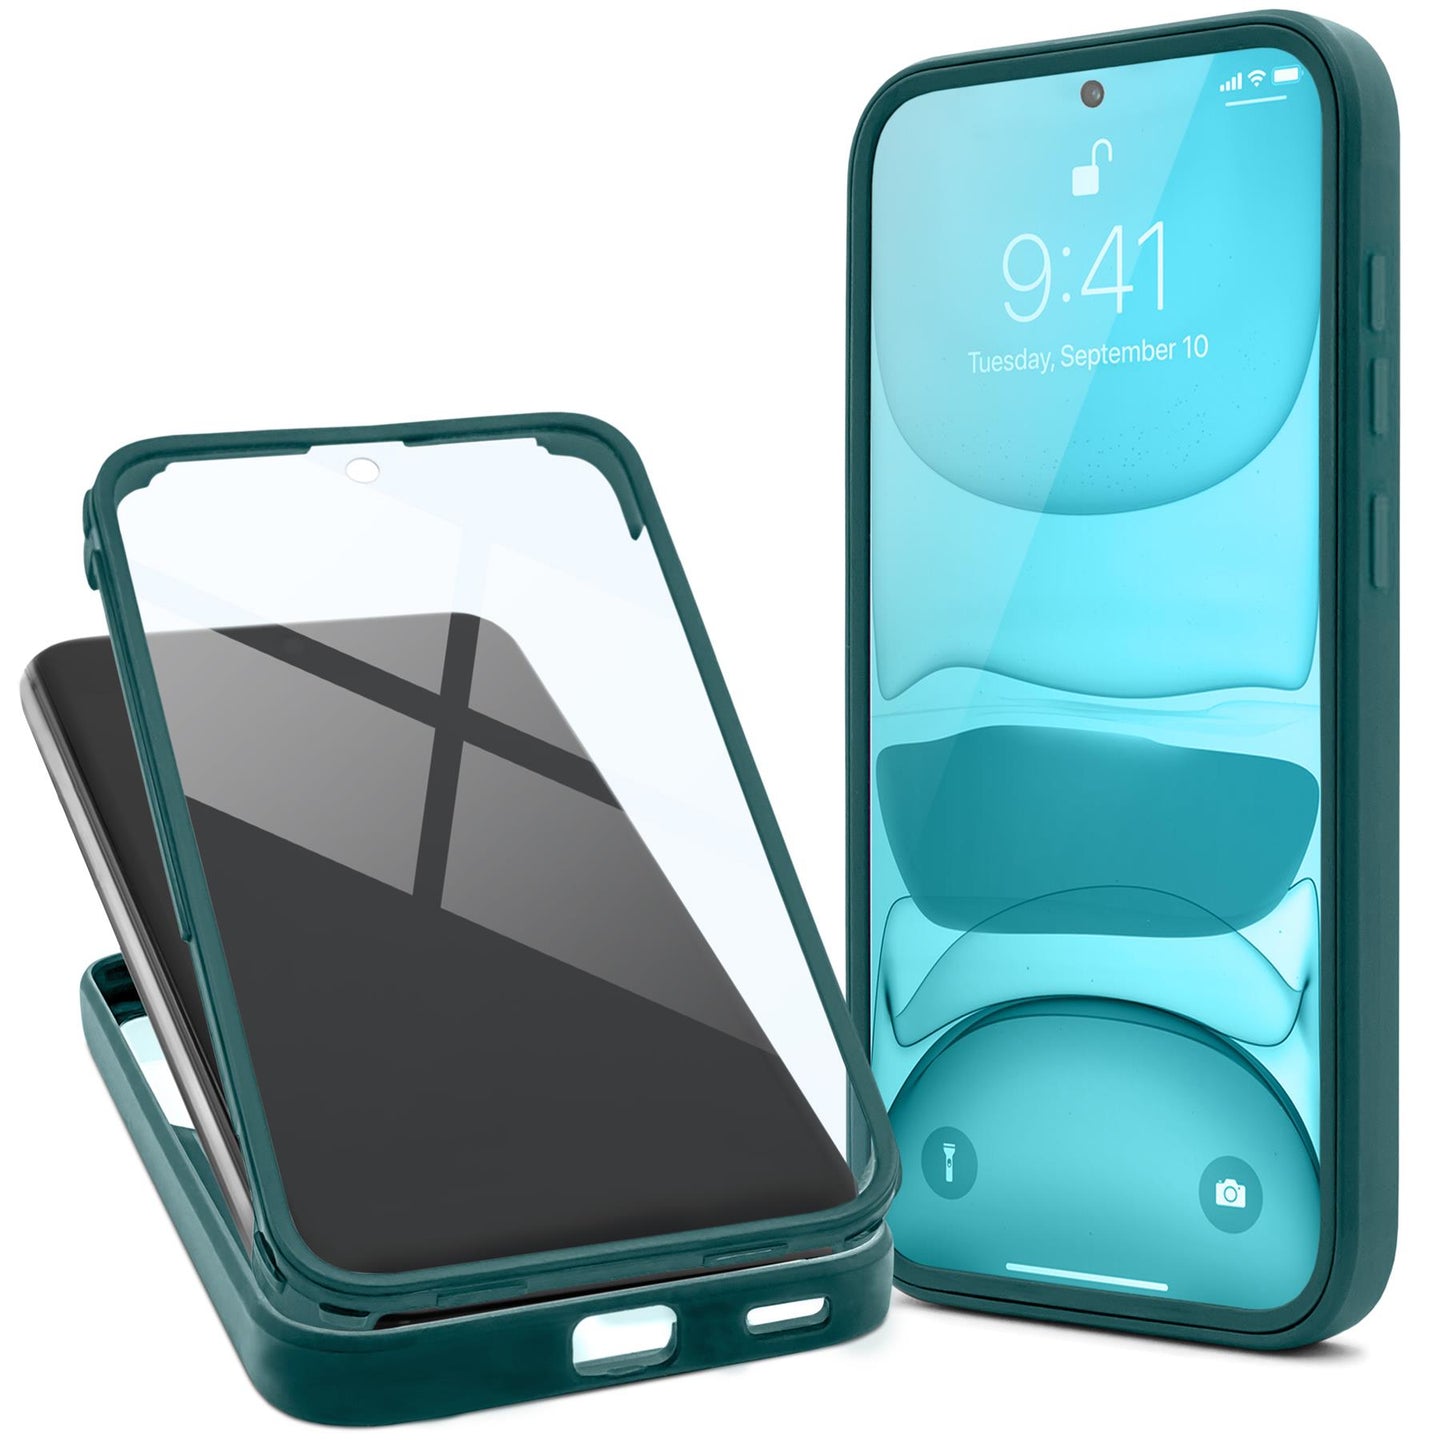 Moozy 360 Case for Samsung S22 - Green Rim Transparent Case, Full Body Double-sided Protection, Cover with Built-in Screen Protector